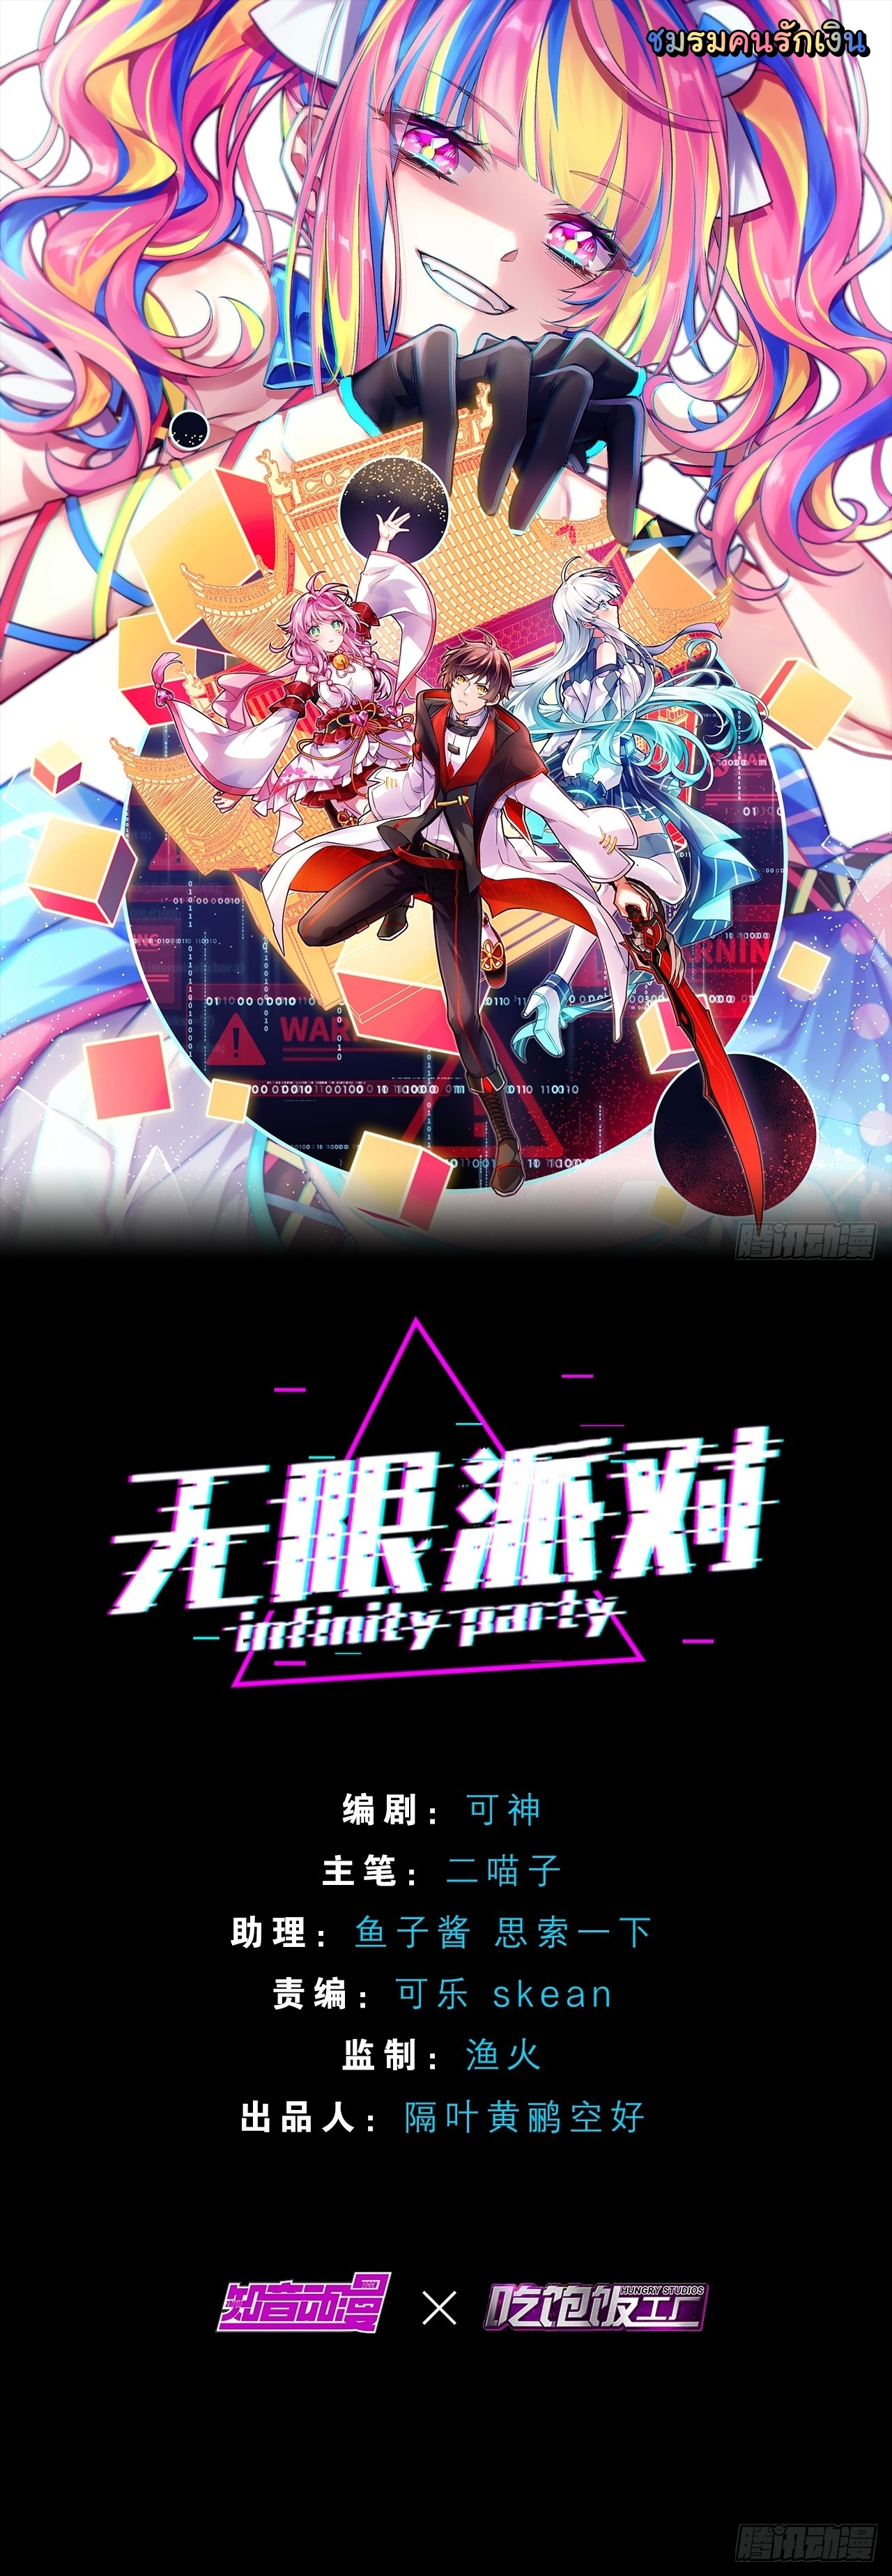 Infinity party 10 (1)